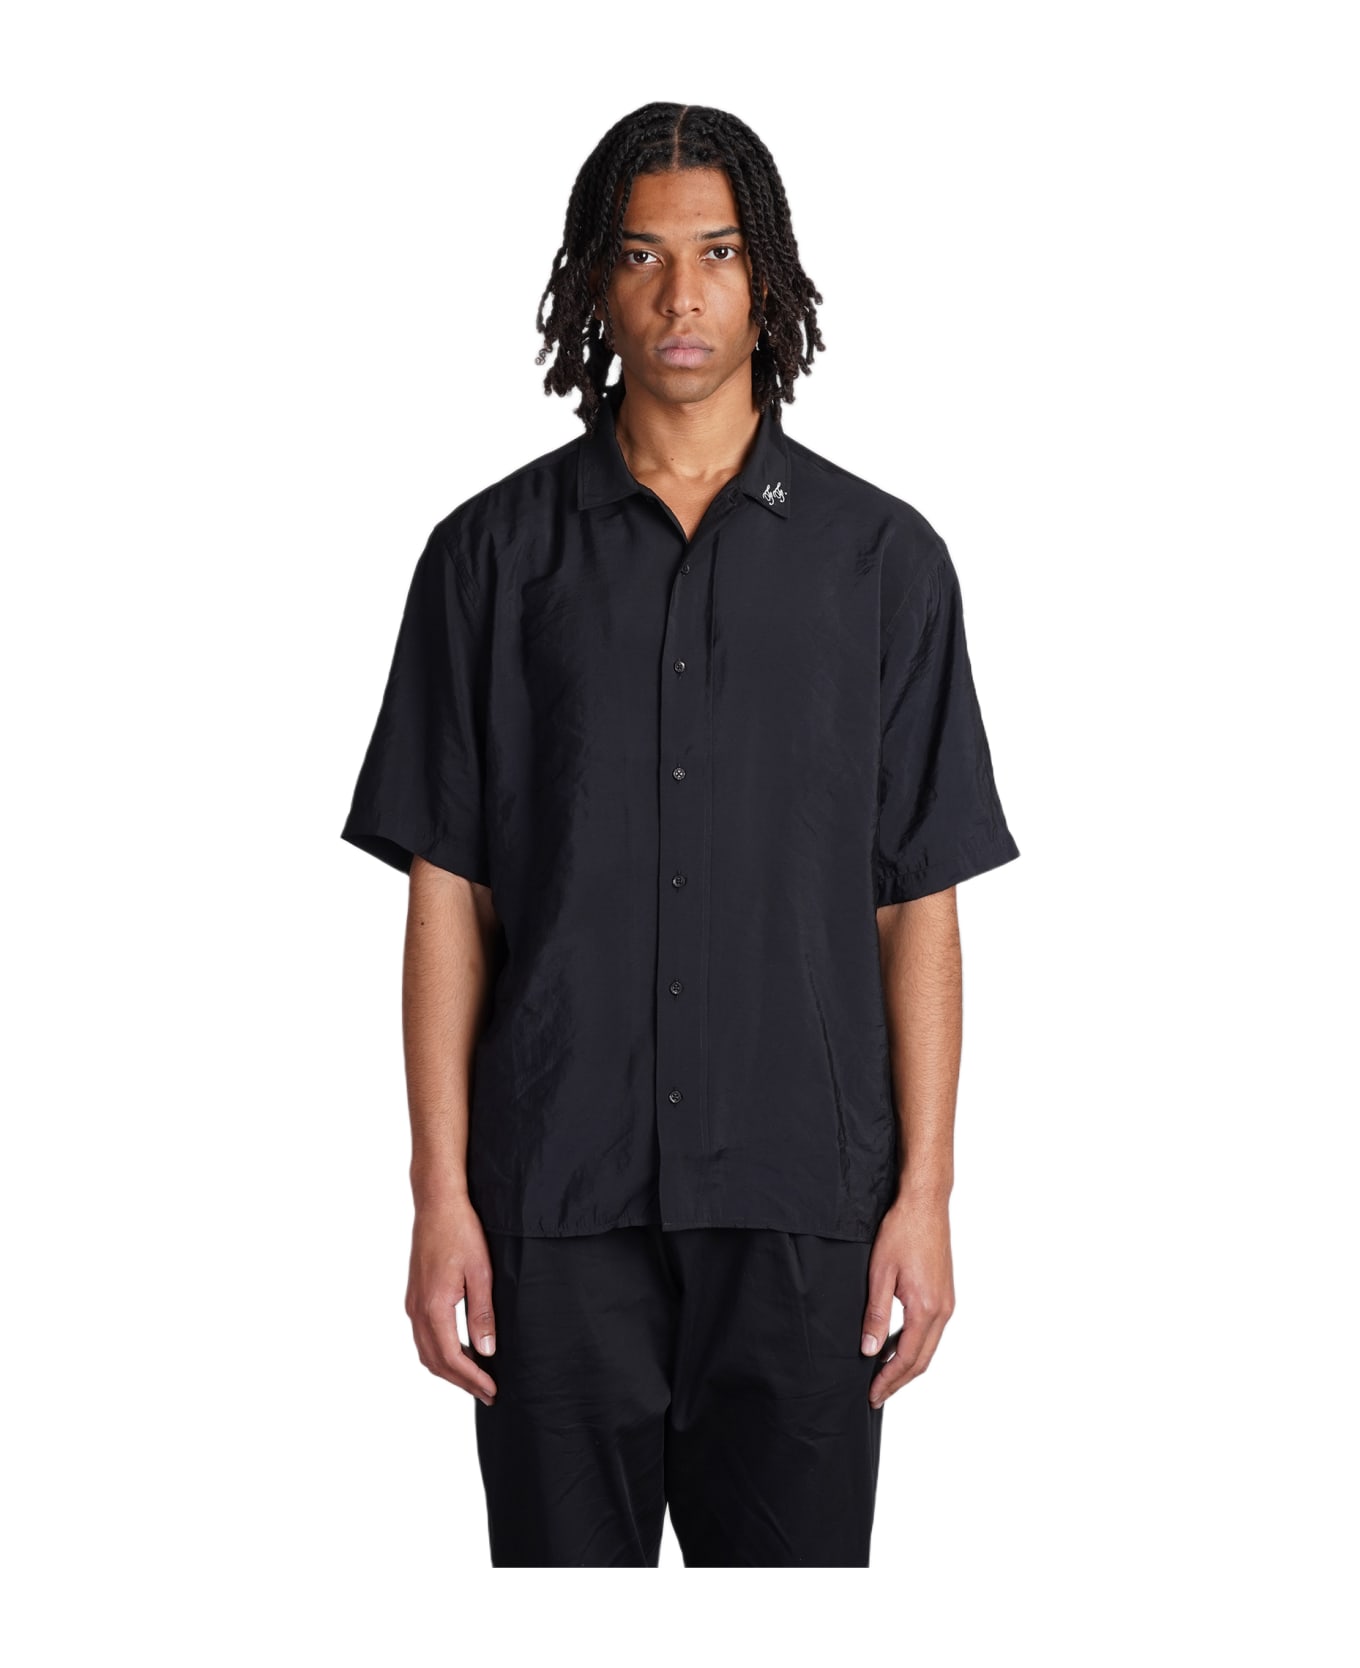 Family First Milano Shirt In Black Paper - BLACK シャツ